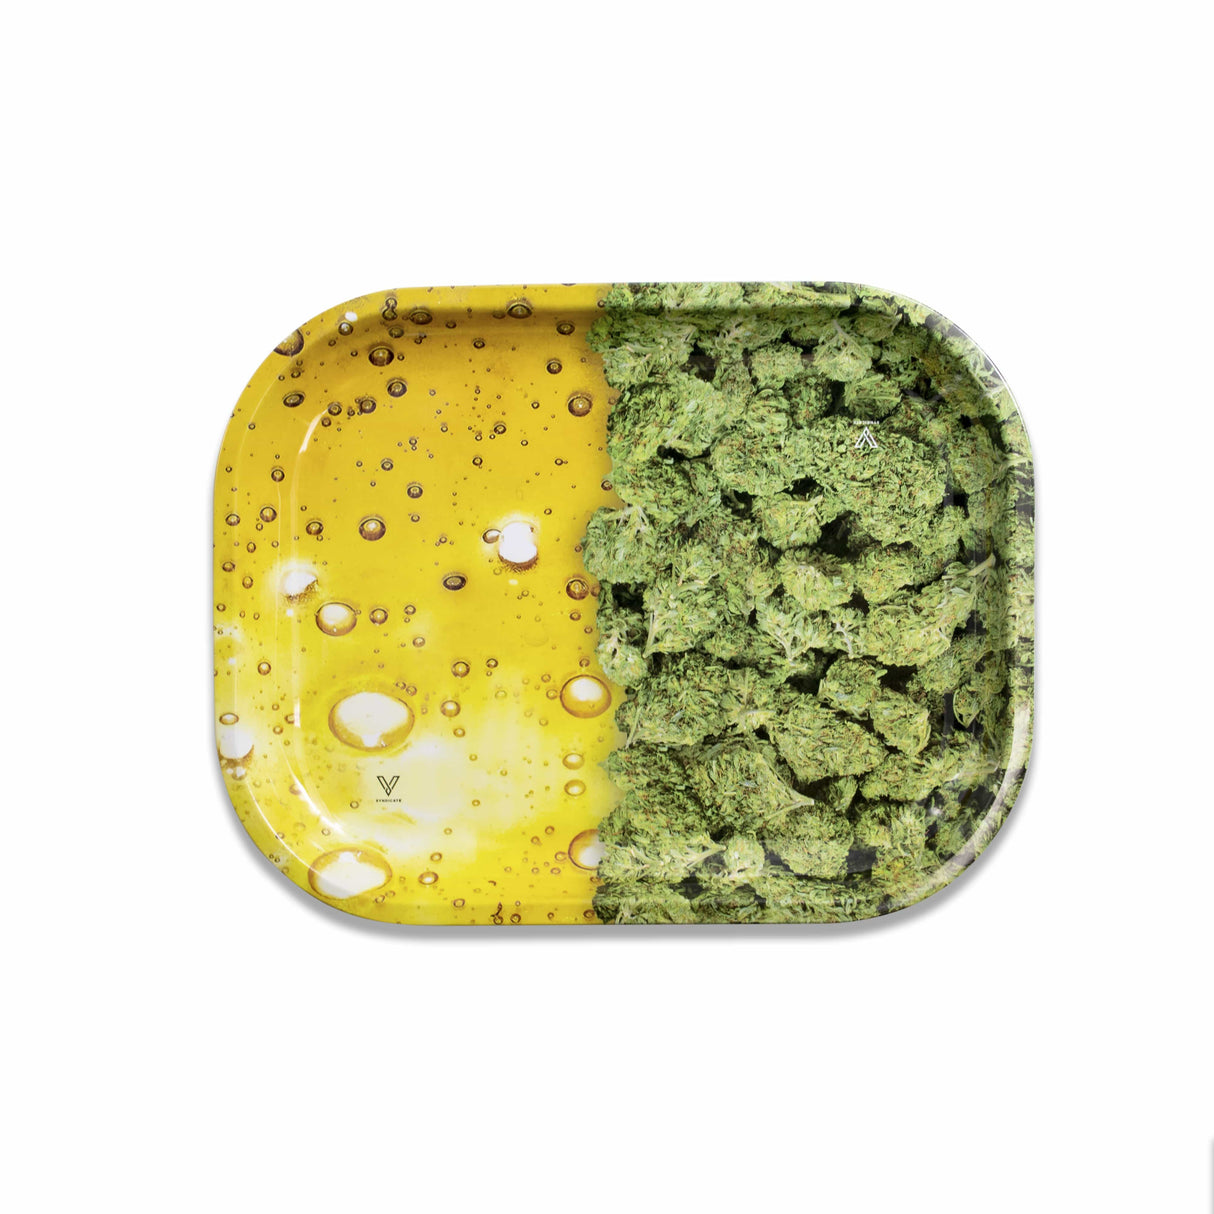 V Syndicate Hybrid Buds/Oil Rollin' Tray with vibrant green herbs on a yellow compact metal tray, top view